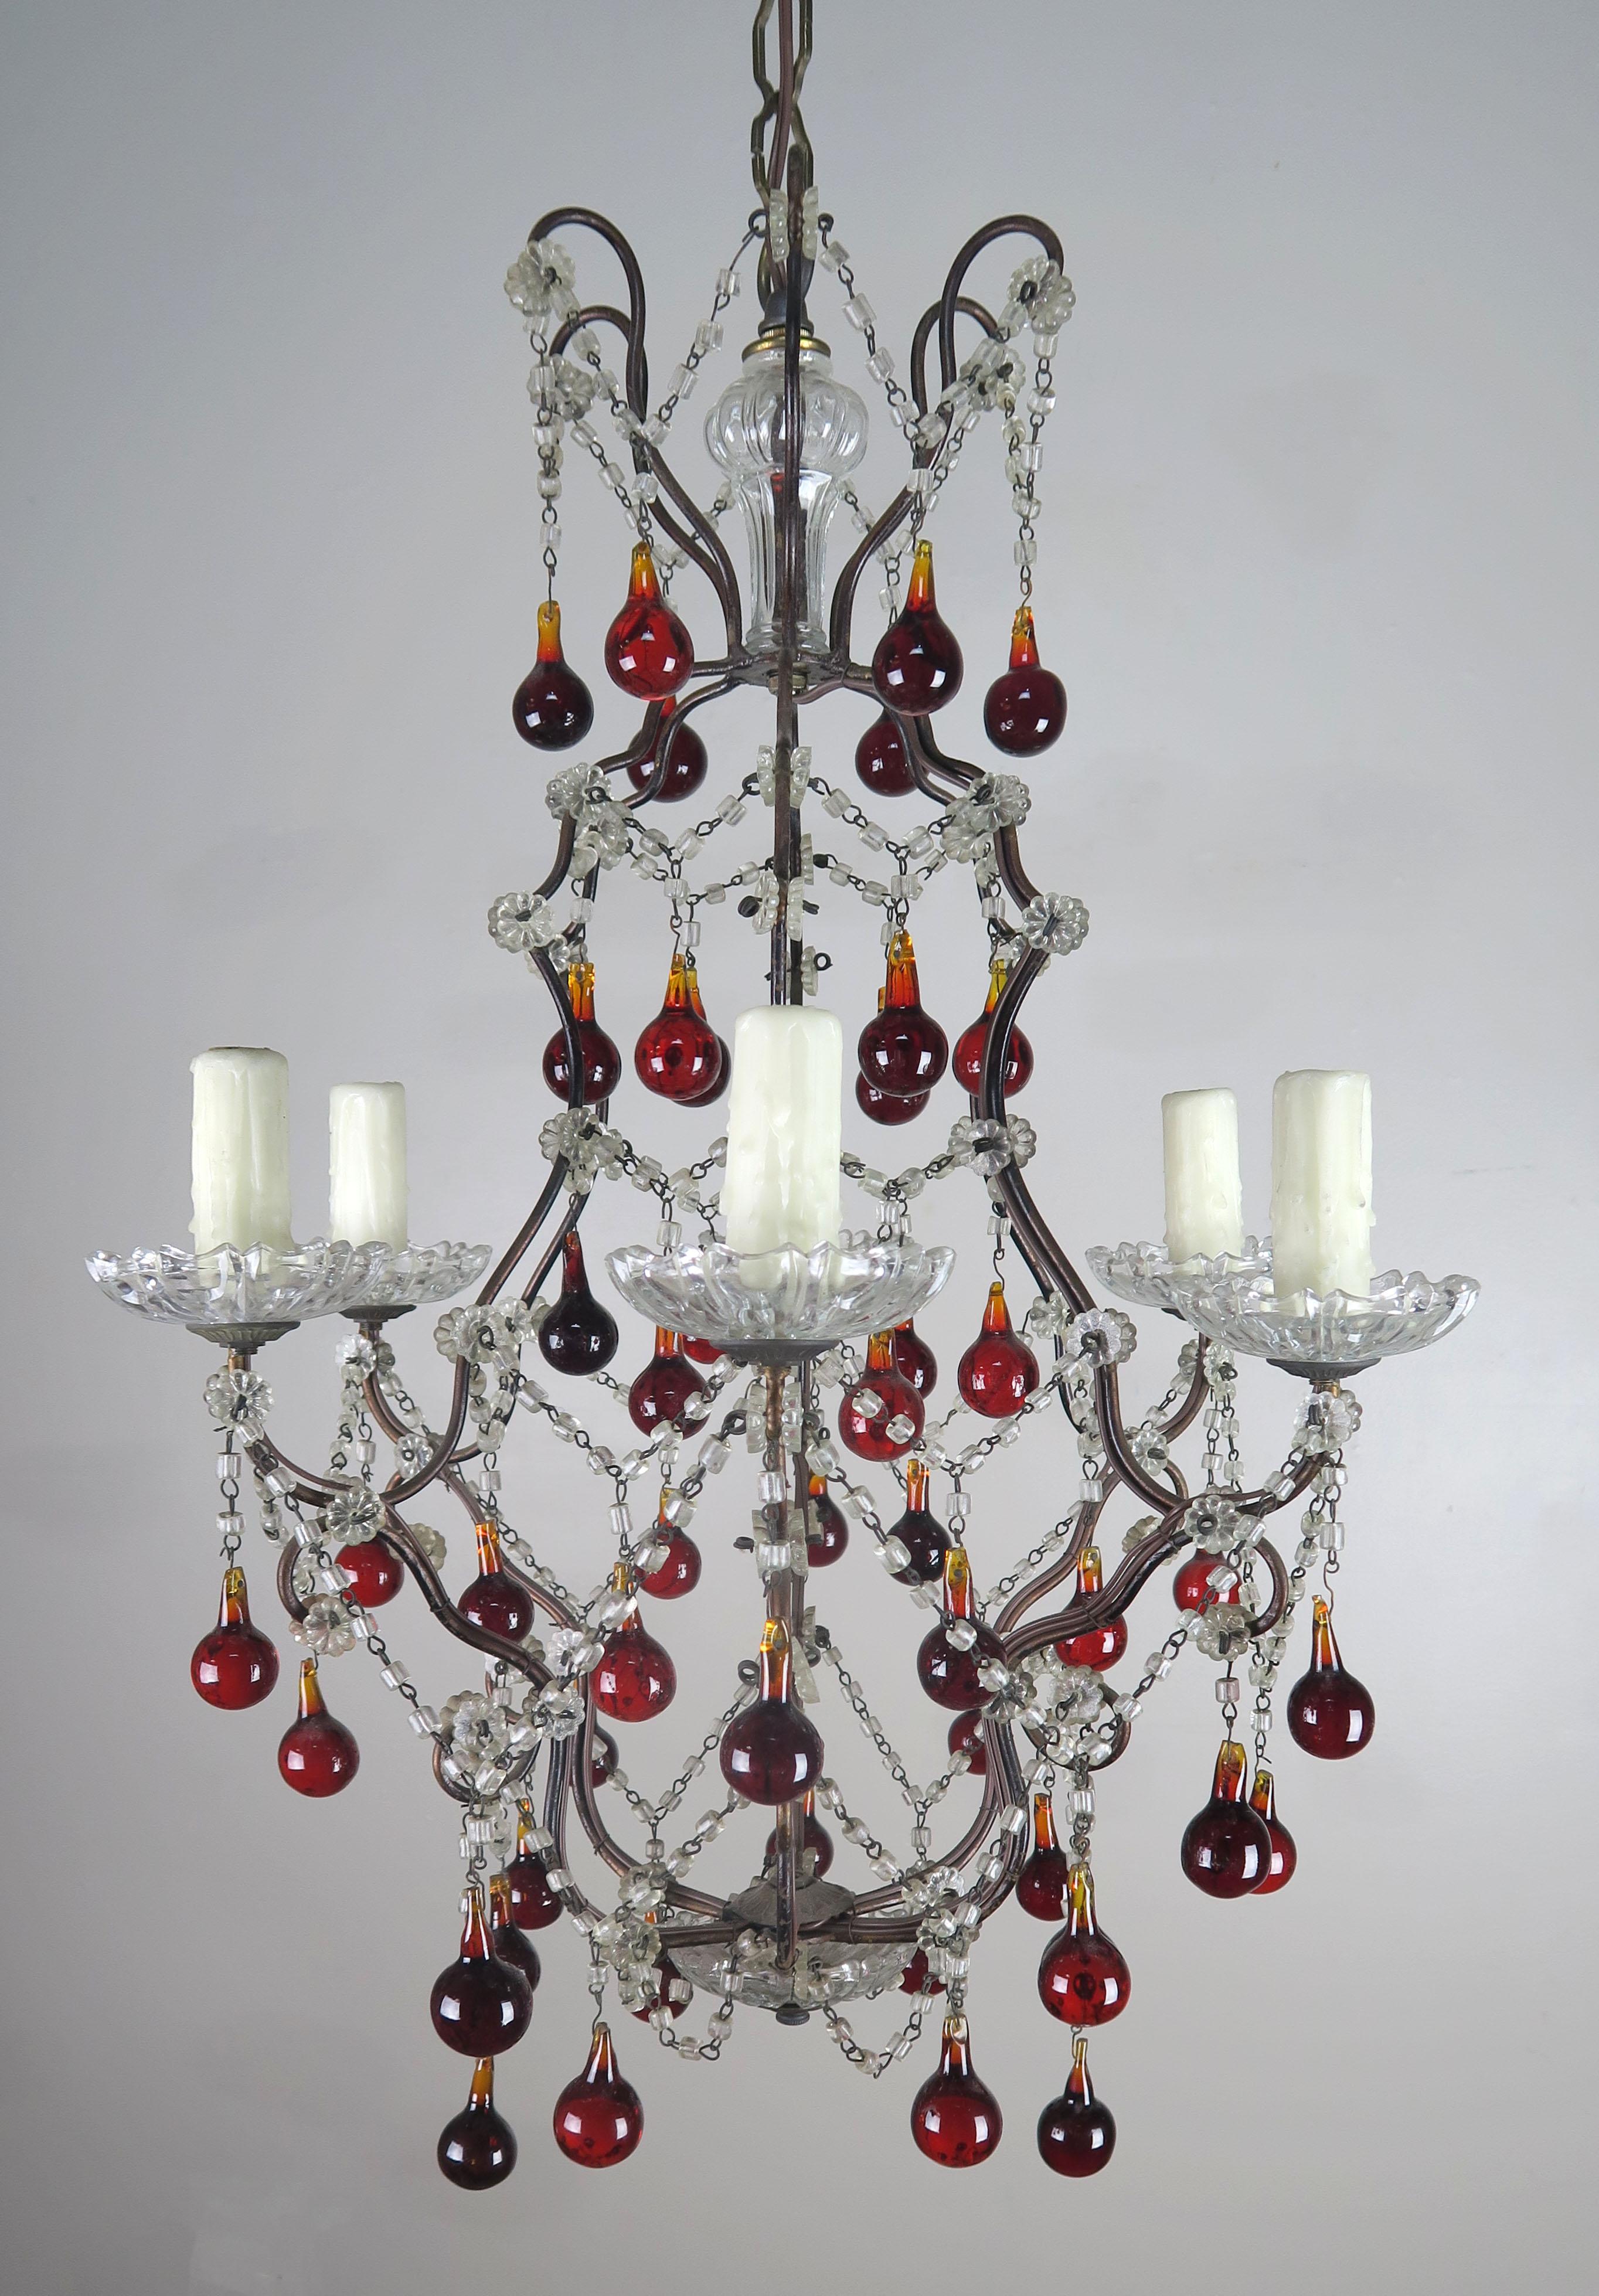 Italian 1930s macaroni beaded six-light chandelier adorned with vibrant crimson colored drops. Clear crystal bobeches. The fixture is newly rewired with drip wax candle covers and includes chain and canopy.